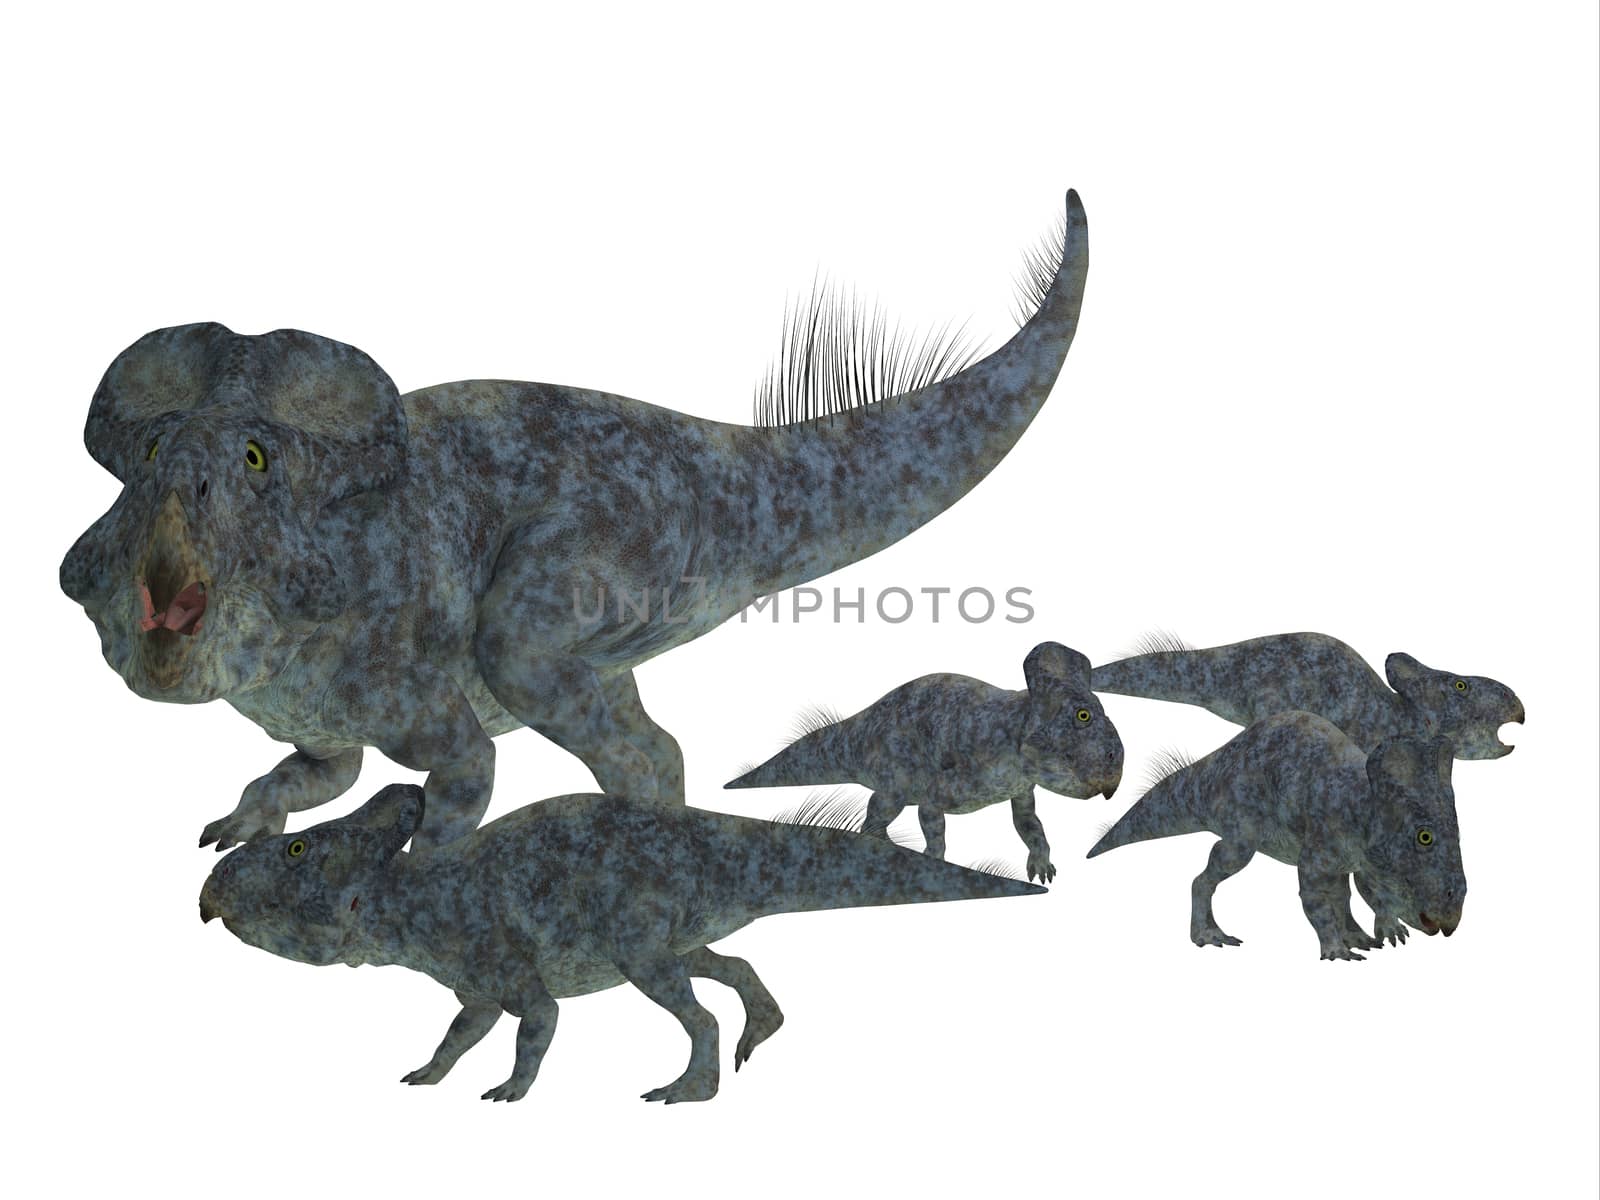 Protoceratops was a herbivorous Ceratopsian dinosaur that lived in Mongolia in the Cretaceous Period.